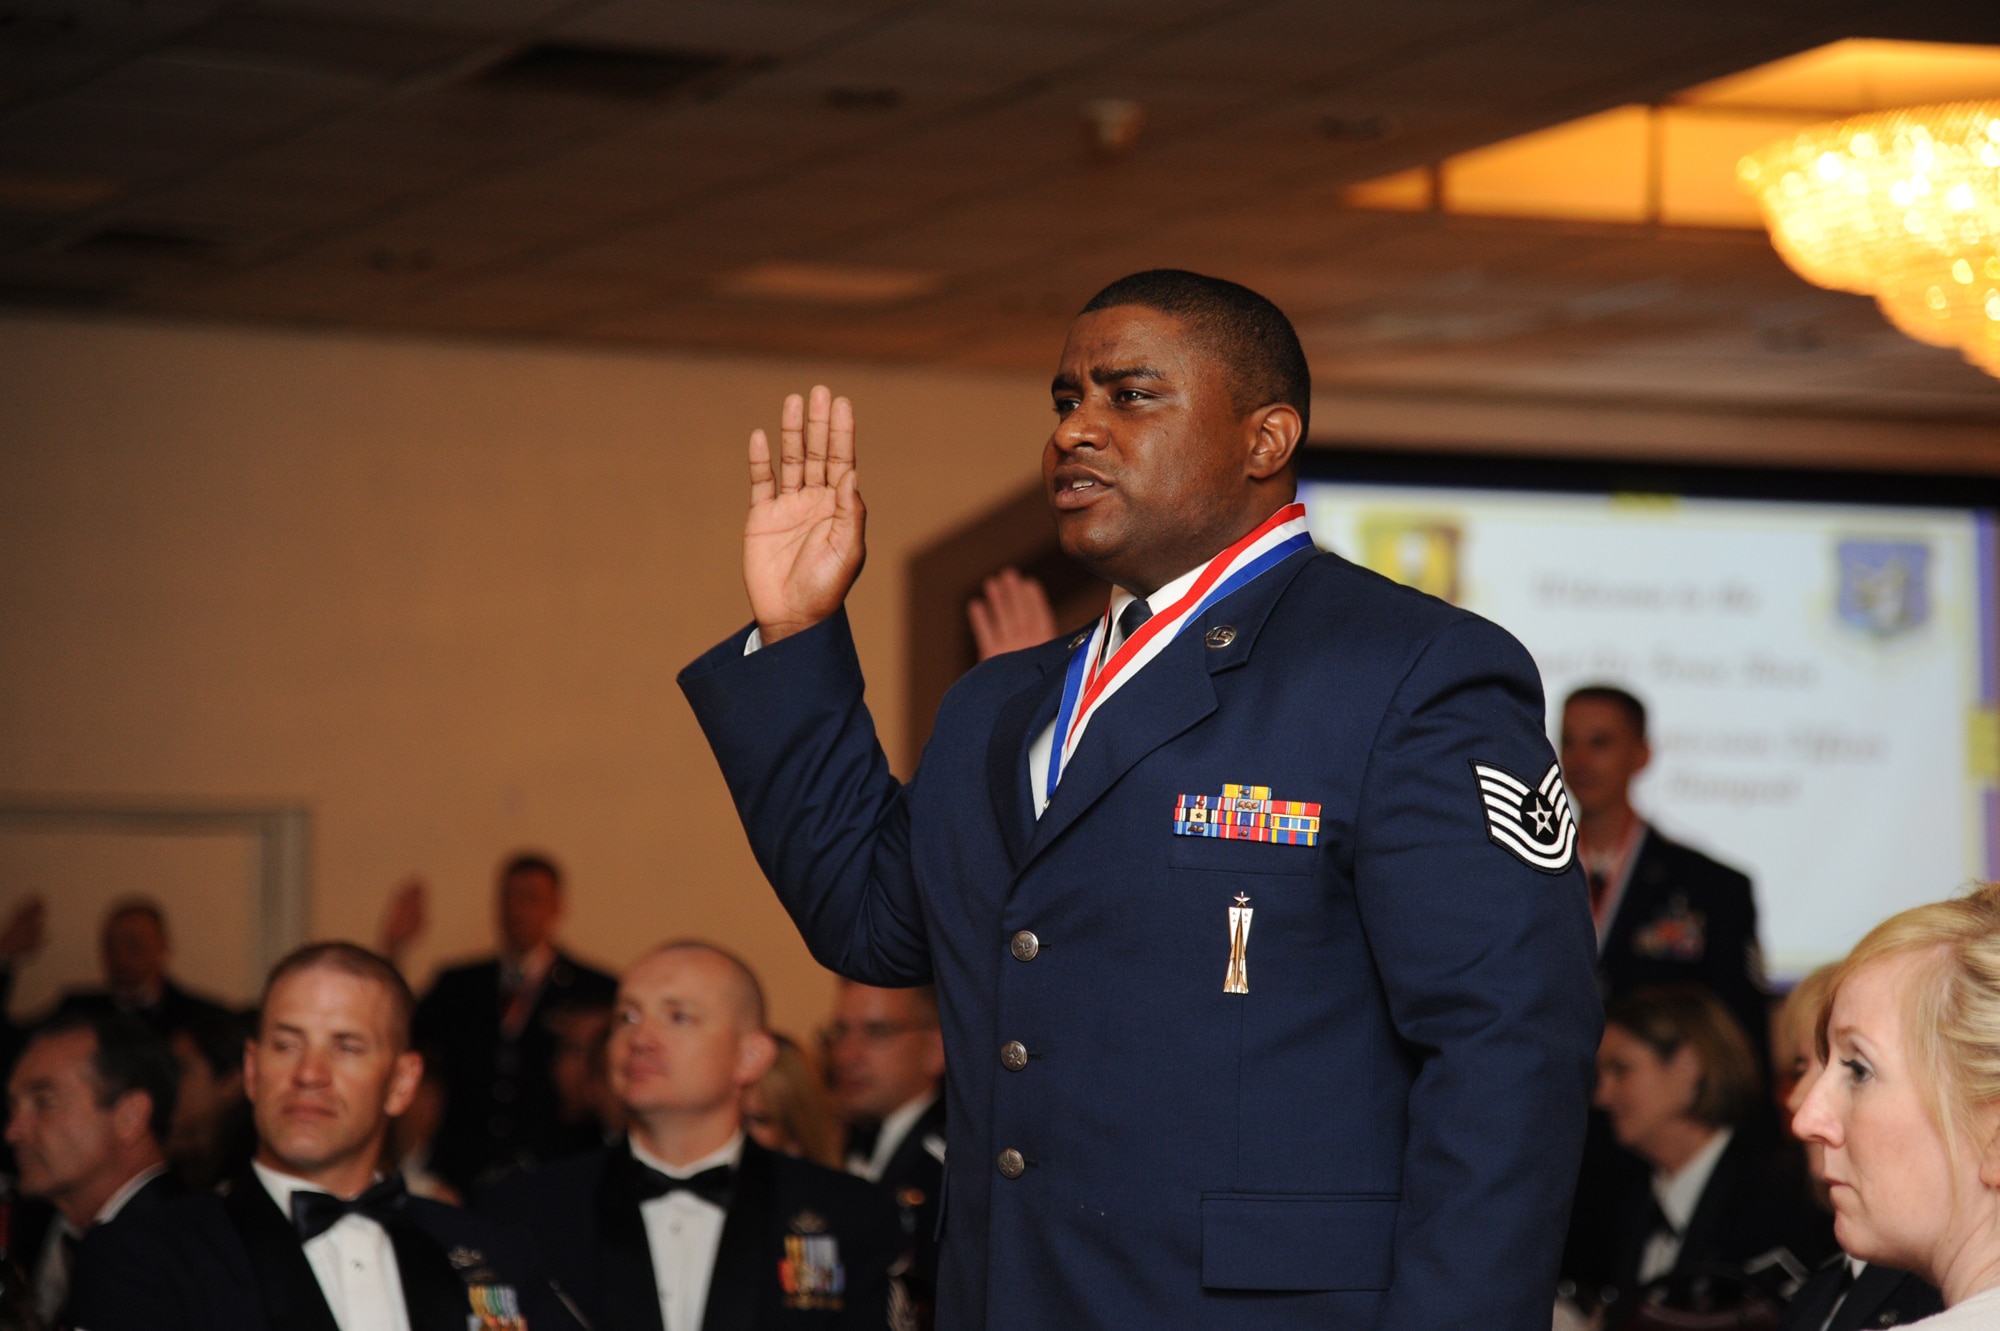 One of Minot Air Force Base’s newest senior noncommissioned officer inductee Tech. Sgt. Trulyn Williams, 91st Missile Operations Squadron, recites an oath during the SNCO Induction Ceremony at the Vegas Motel in Minot, N.D., July 12, 2013.  Chief Master Sgt. of the Air Force James Cody was the guest speaker for the event and spoke to the group of 49 master sergeant selects about the importance of their responsibilities and the select company they are now a part of. The ceremony was held to recognize individuals who progress through the ranks and have been selected for master sergeant promotion, transitioning them to senior leadership level with more responsibility. (U.S. Air Force photo/Airman 1st Class Andrew Crawford)